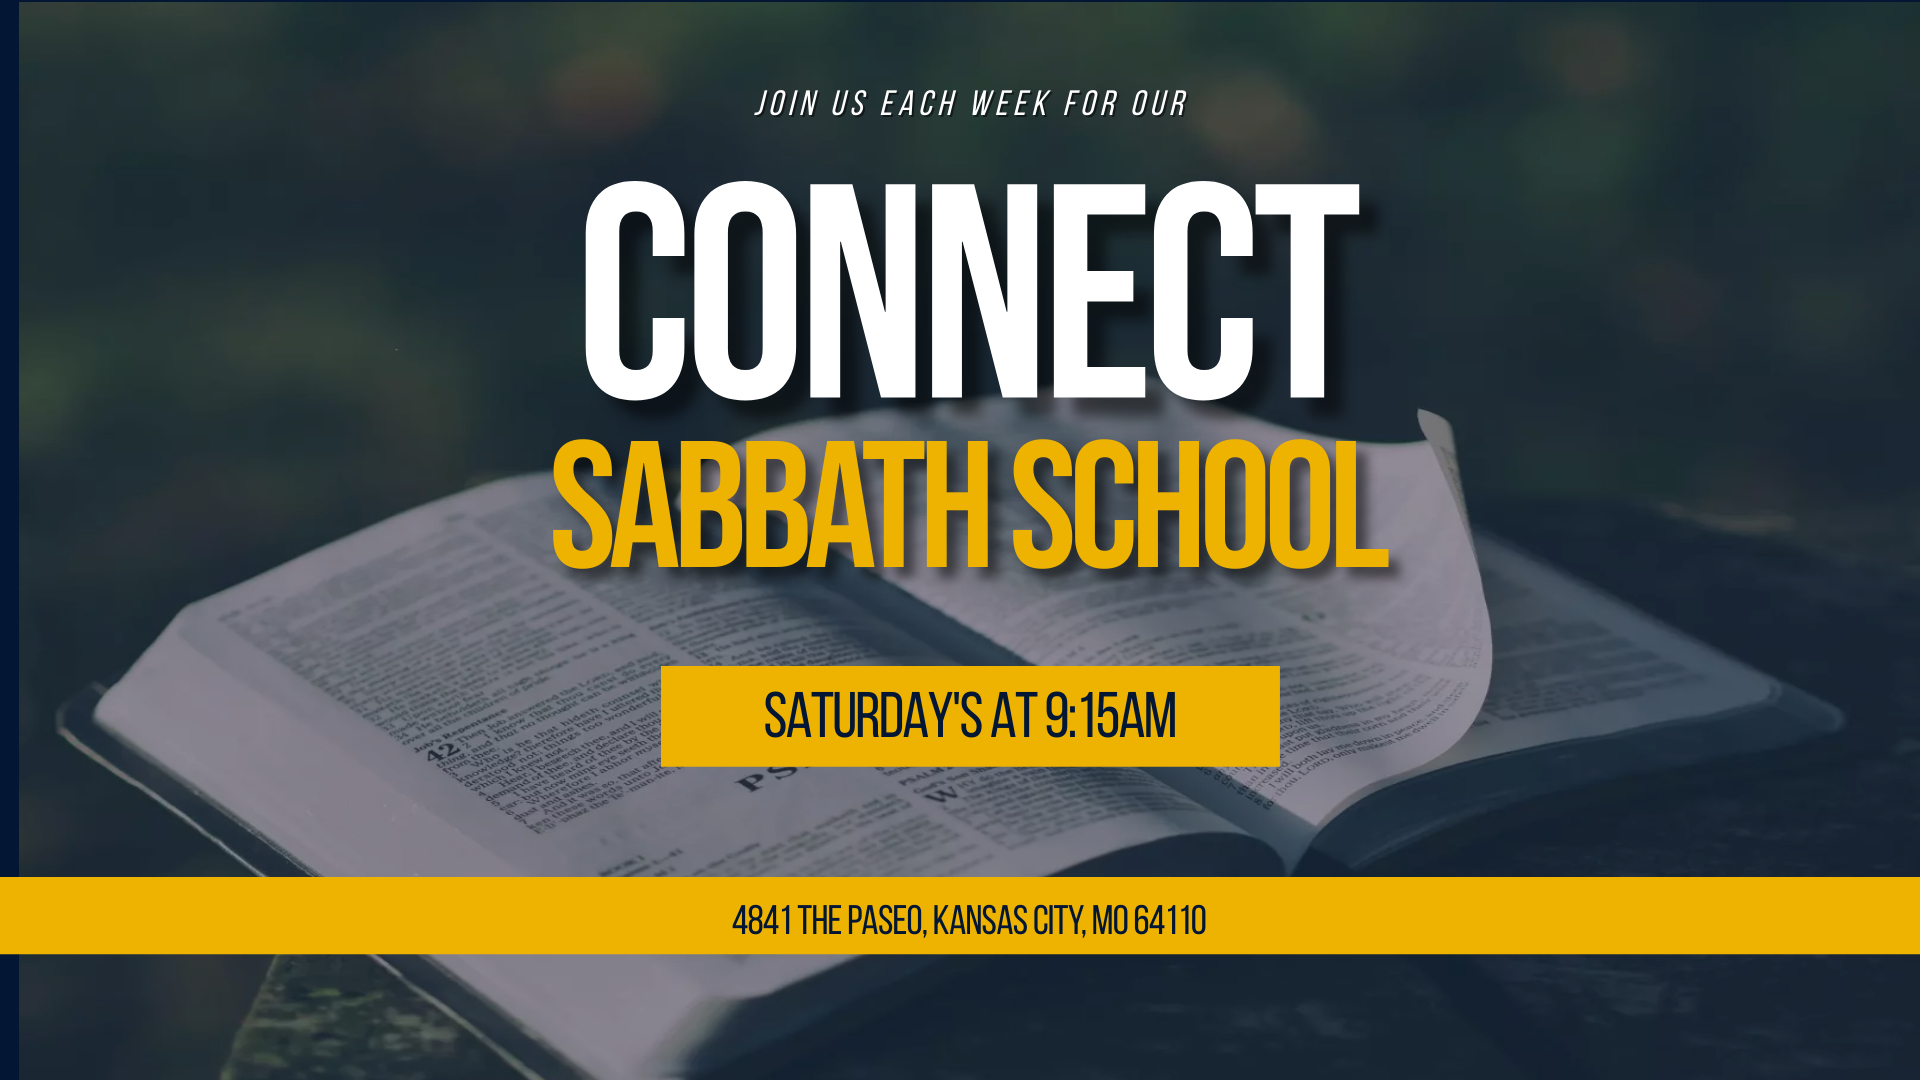 Connect Sabbath School - Made with PosterMyWall (9).jpg